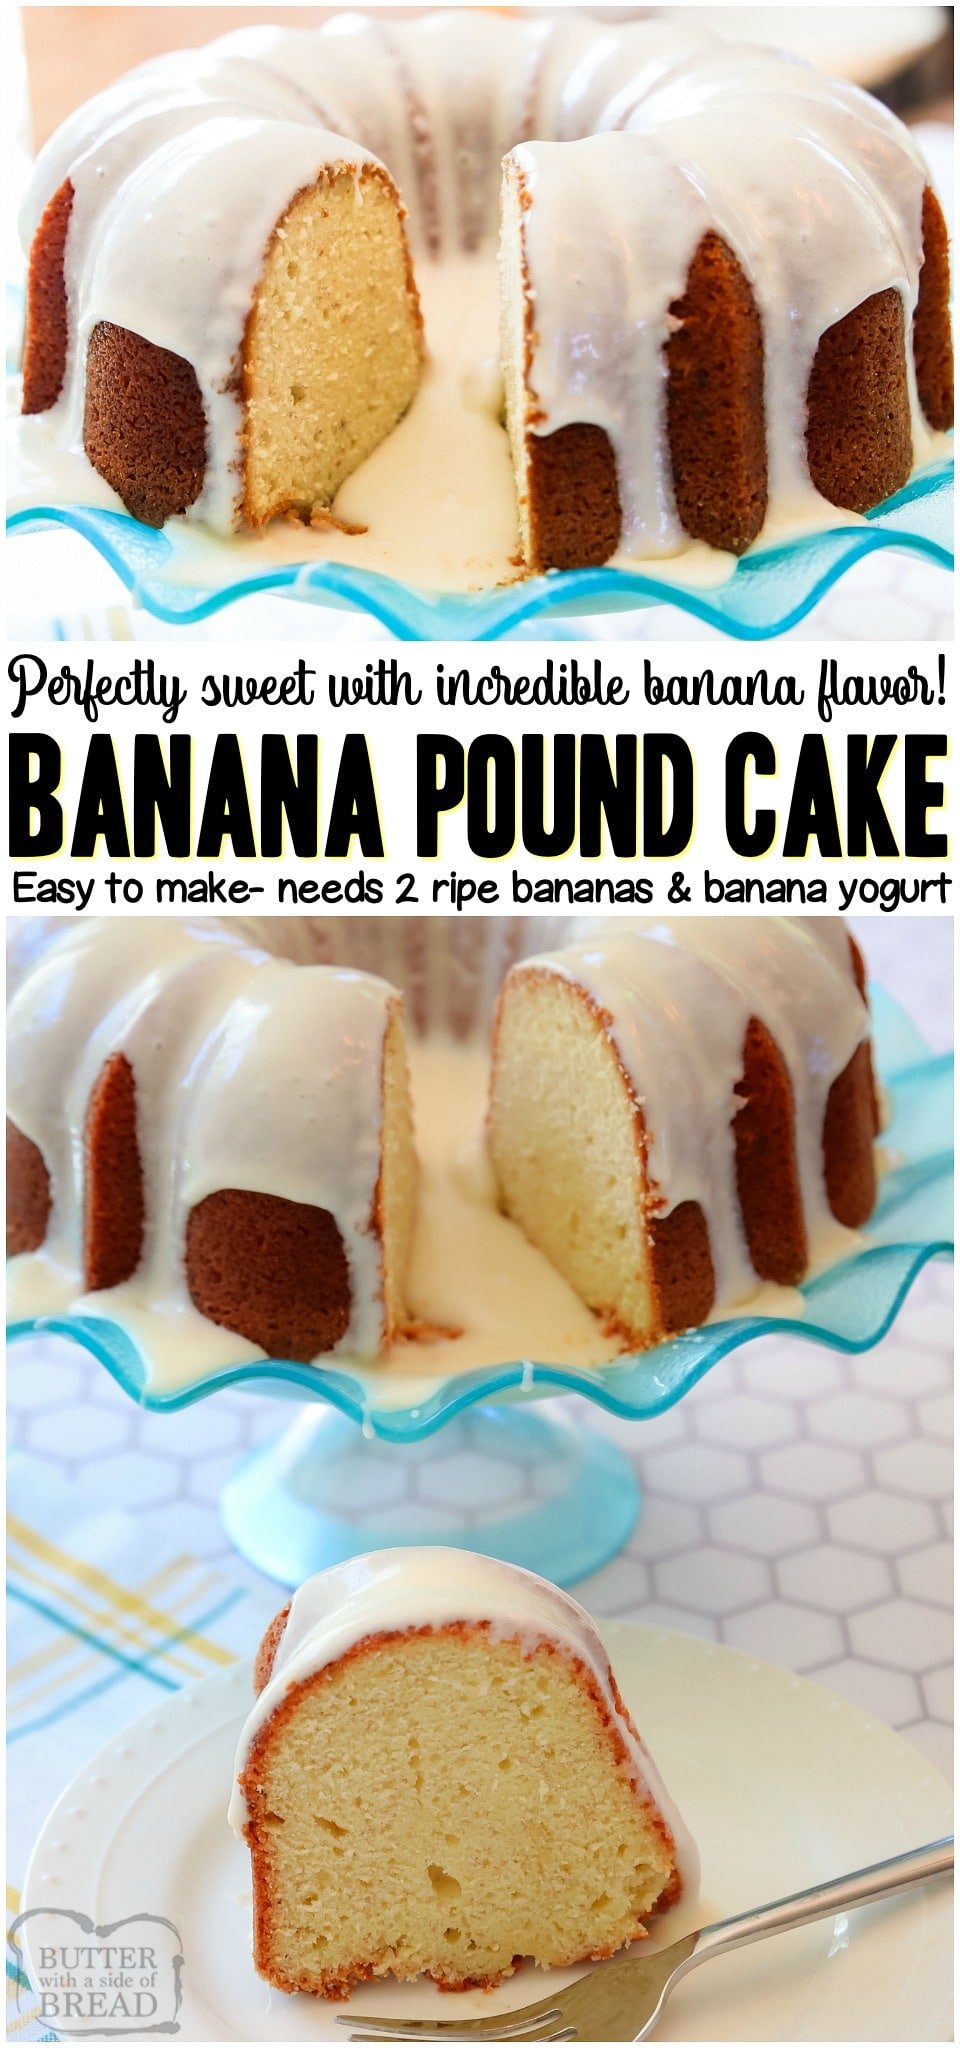 Banana Pound Cake recipe with the most incredible banana flavors ever! Sweet pound cake made with ripe bananas and banana yogurt and topped with a vanilla glaze. #cake #banana #poundcake #butter #baking #dessert #recipe from BUTTER WITH A SIDE OF BREAD